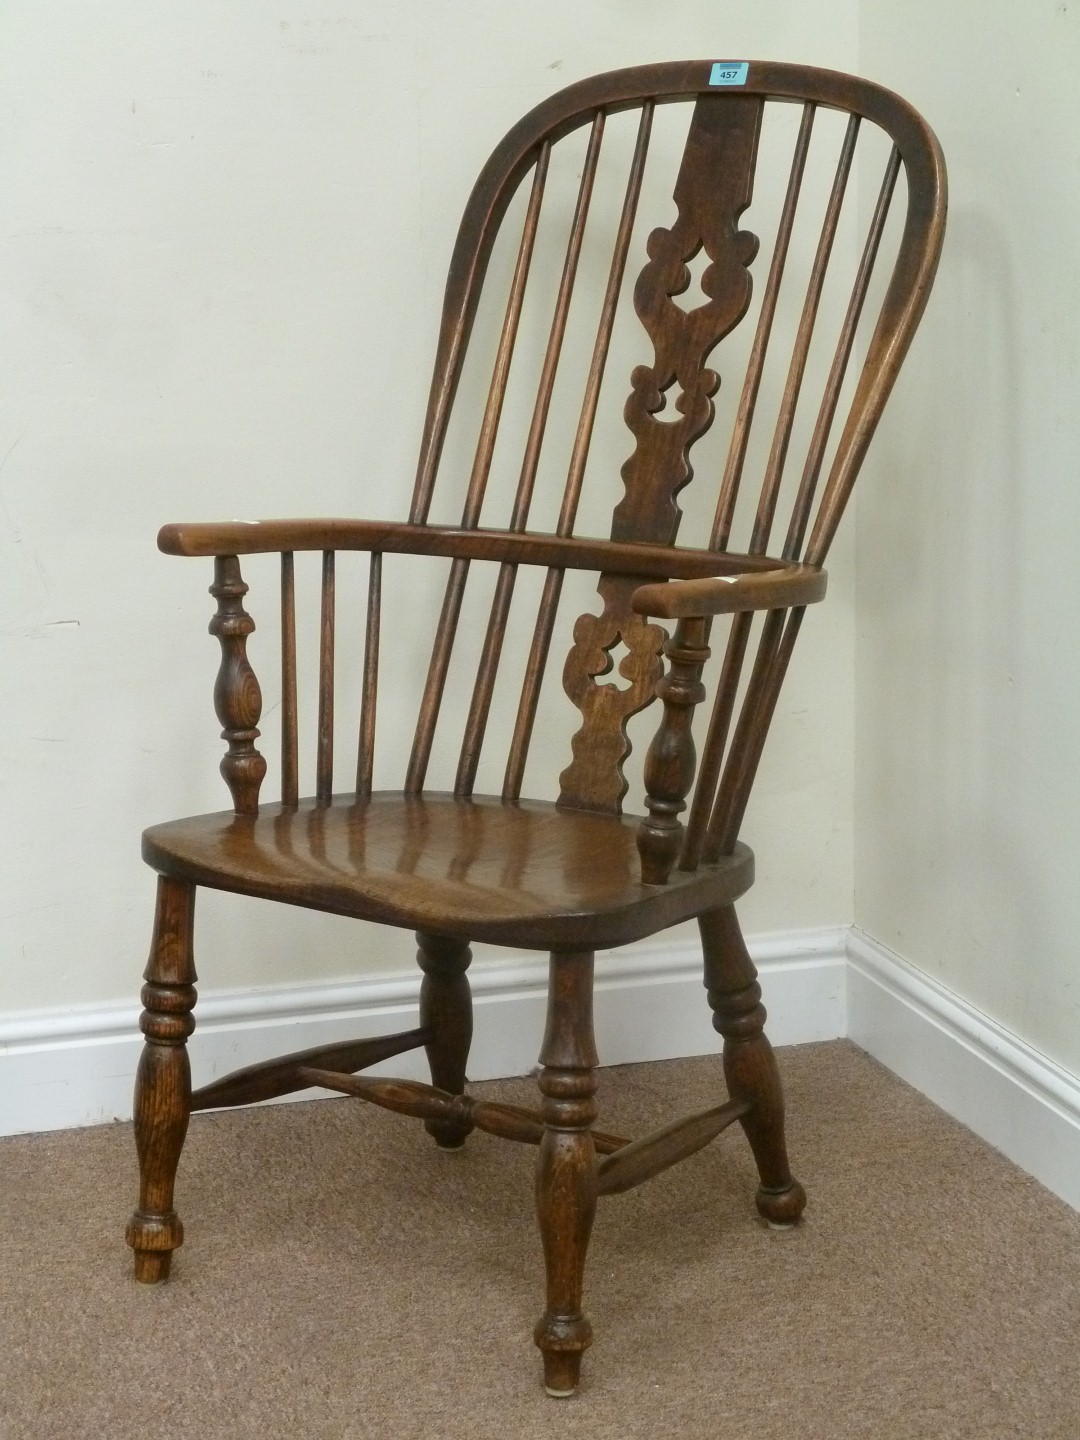 Late 19th century ash and elm double bow and splat back Windsor chair